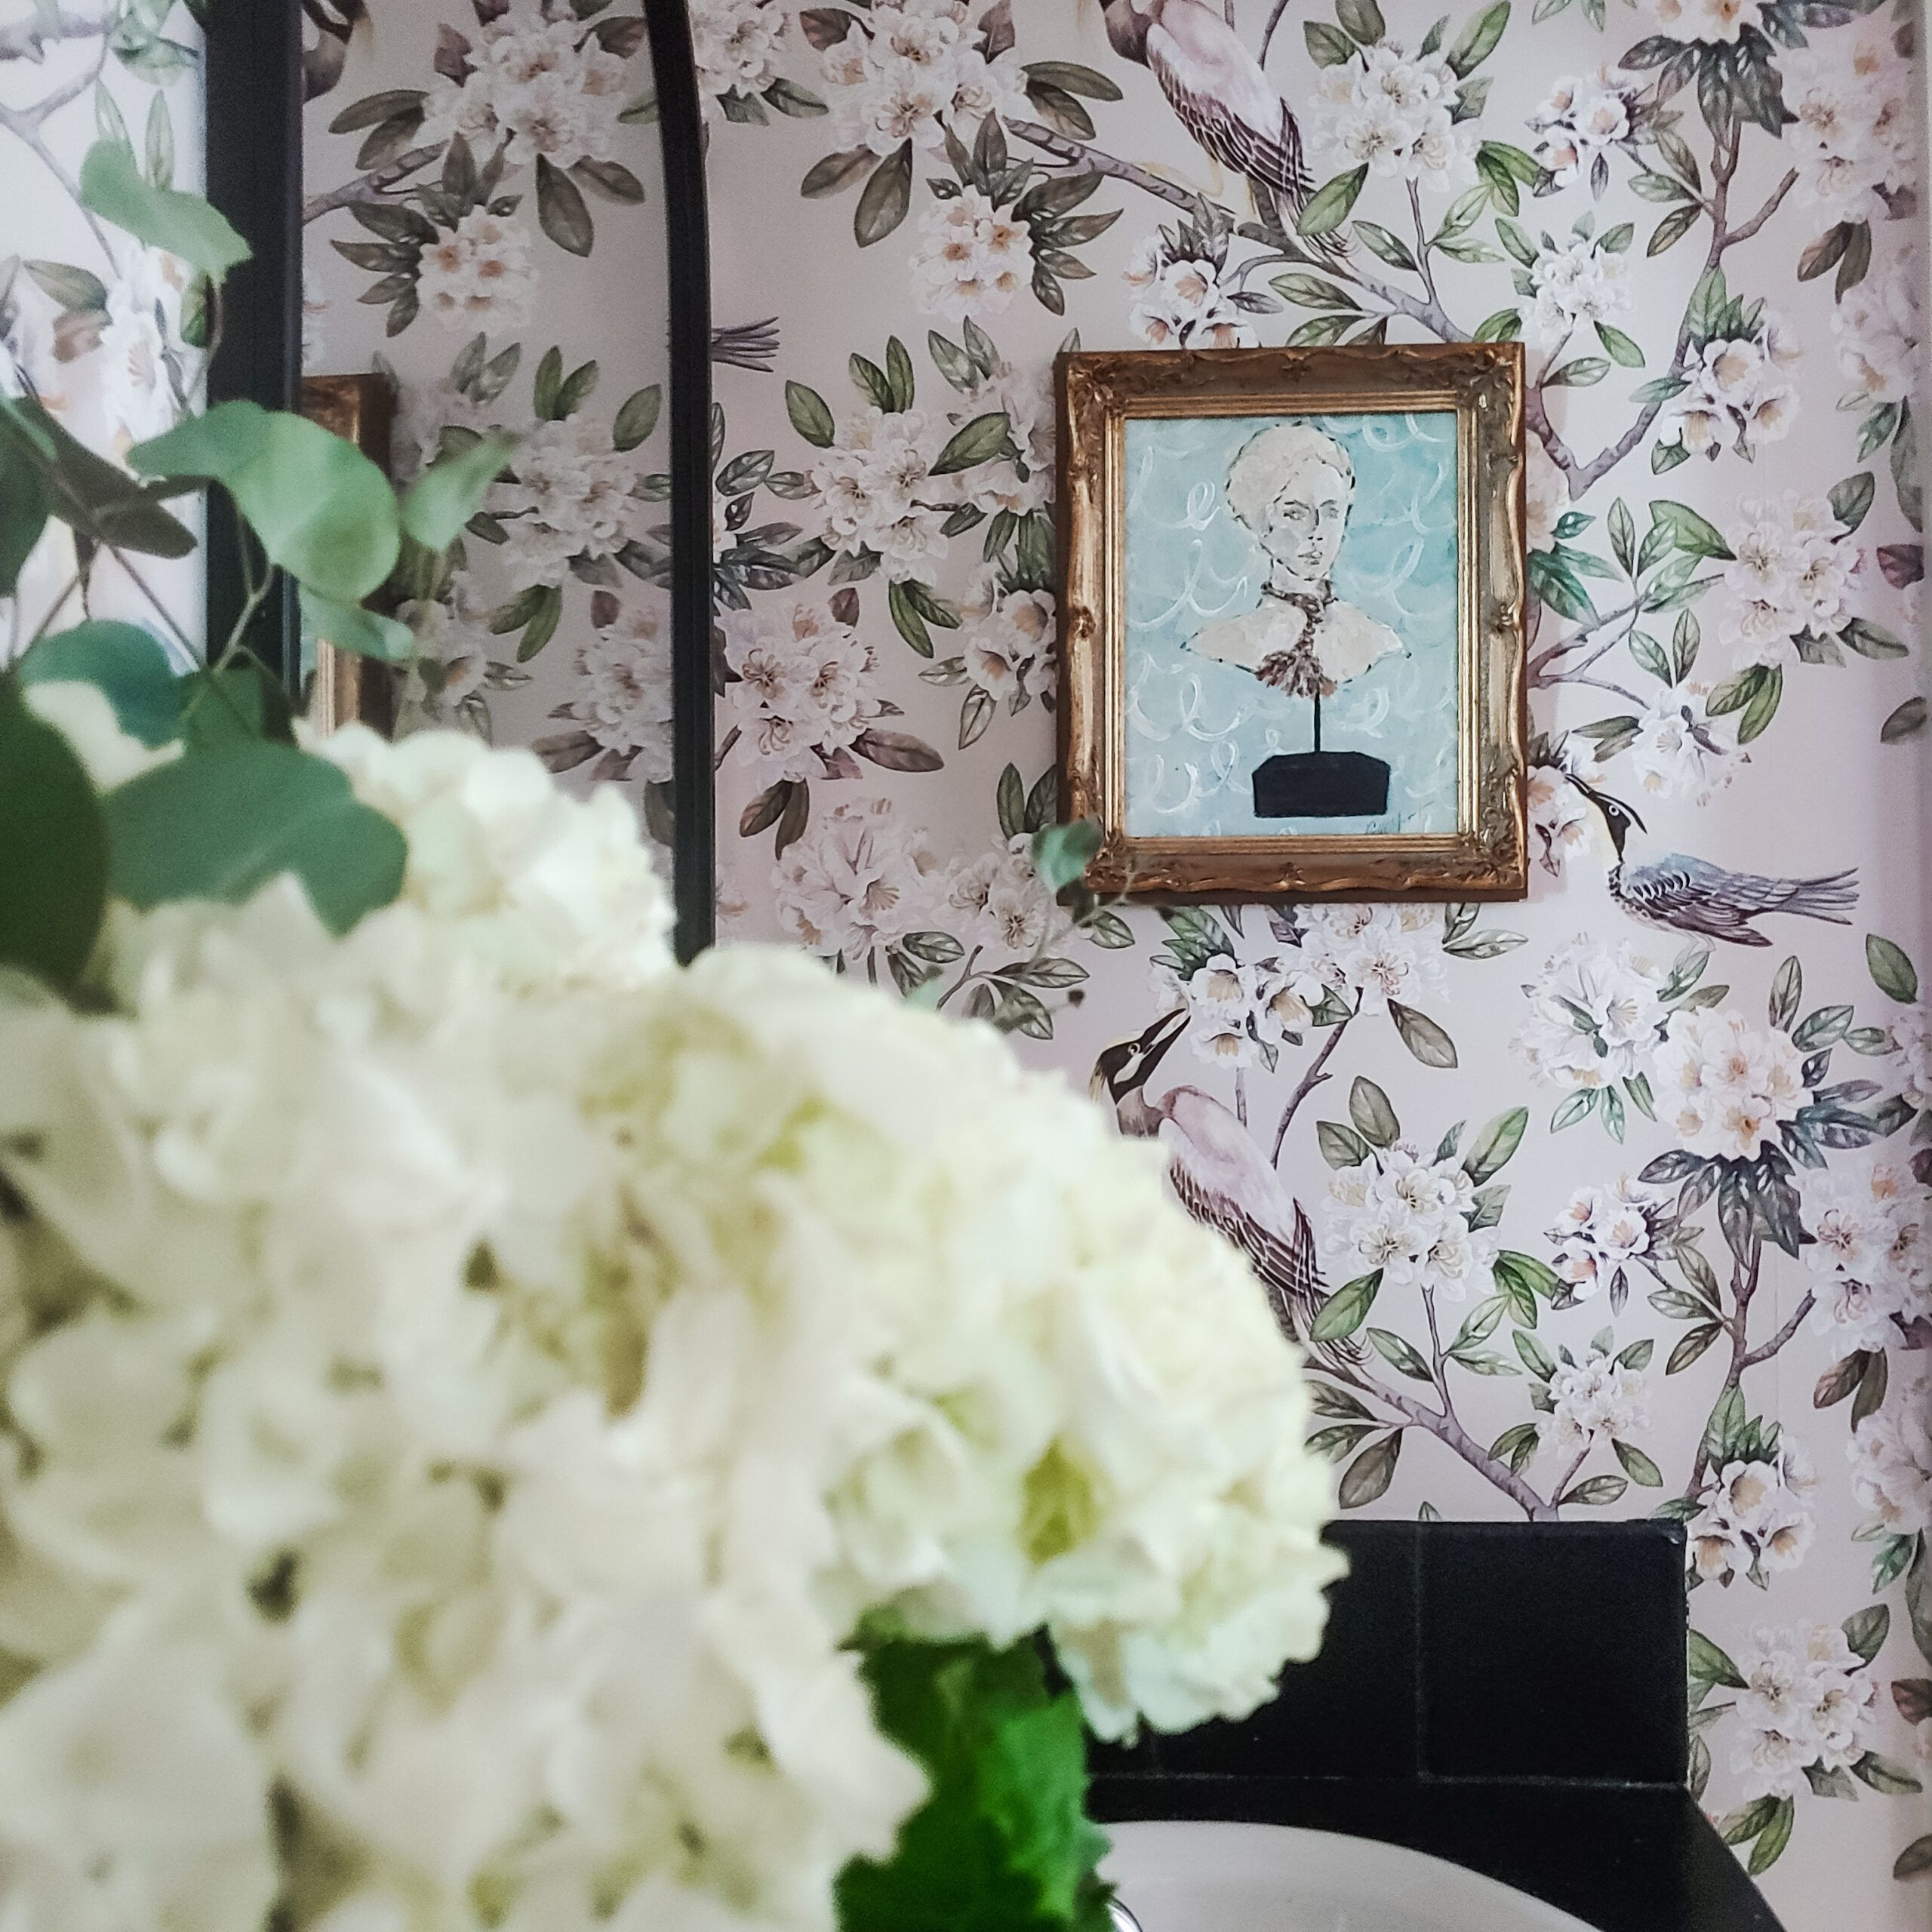 Victoria wallpaper Up Close With Image of Woman framed on wall• Bathroom Wallpaper • G. Lucy Wilkening